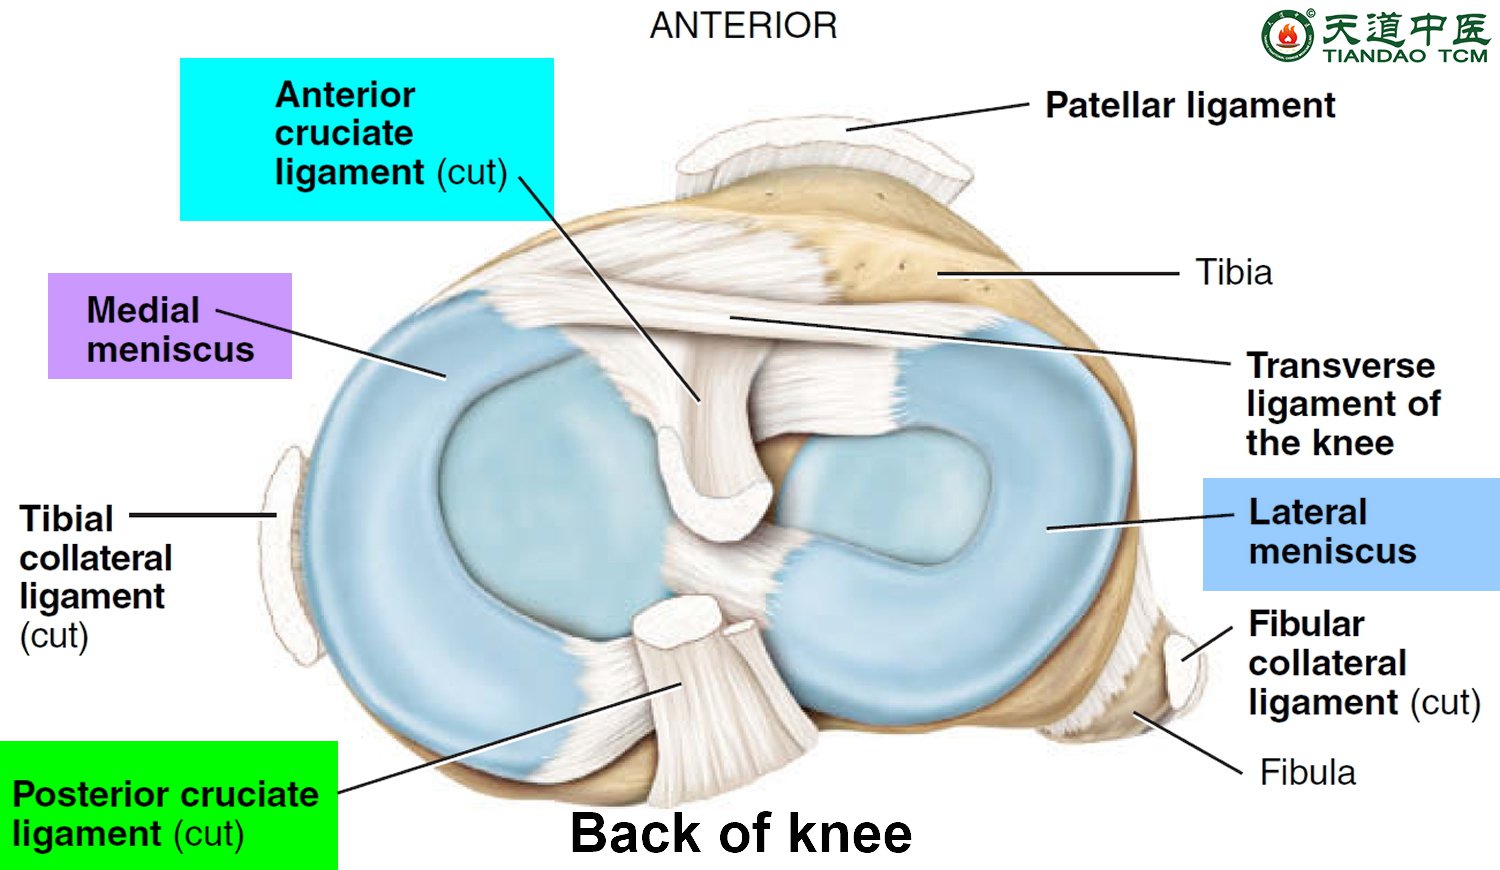 Degenerative lesions of the knee joint